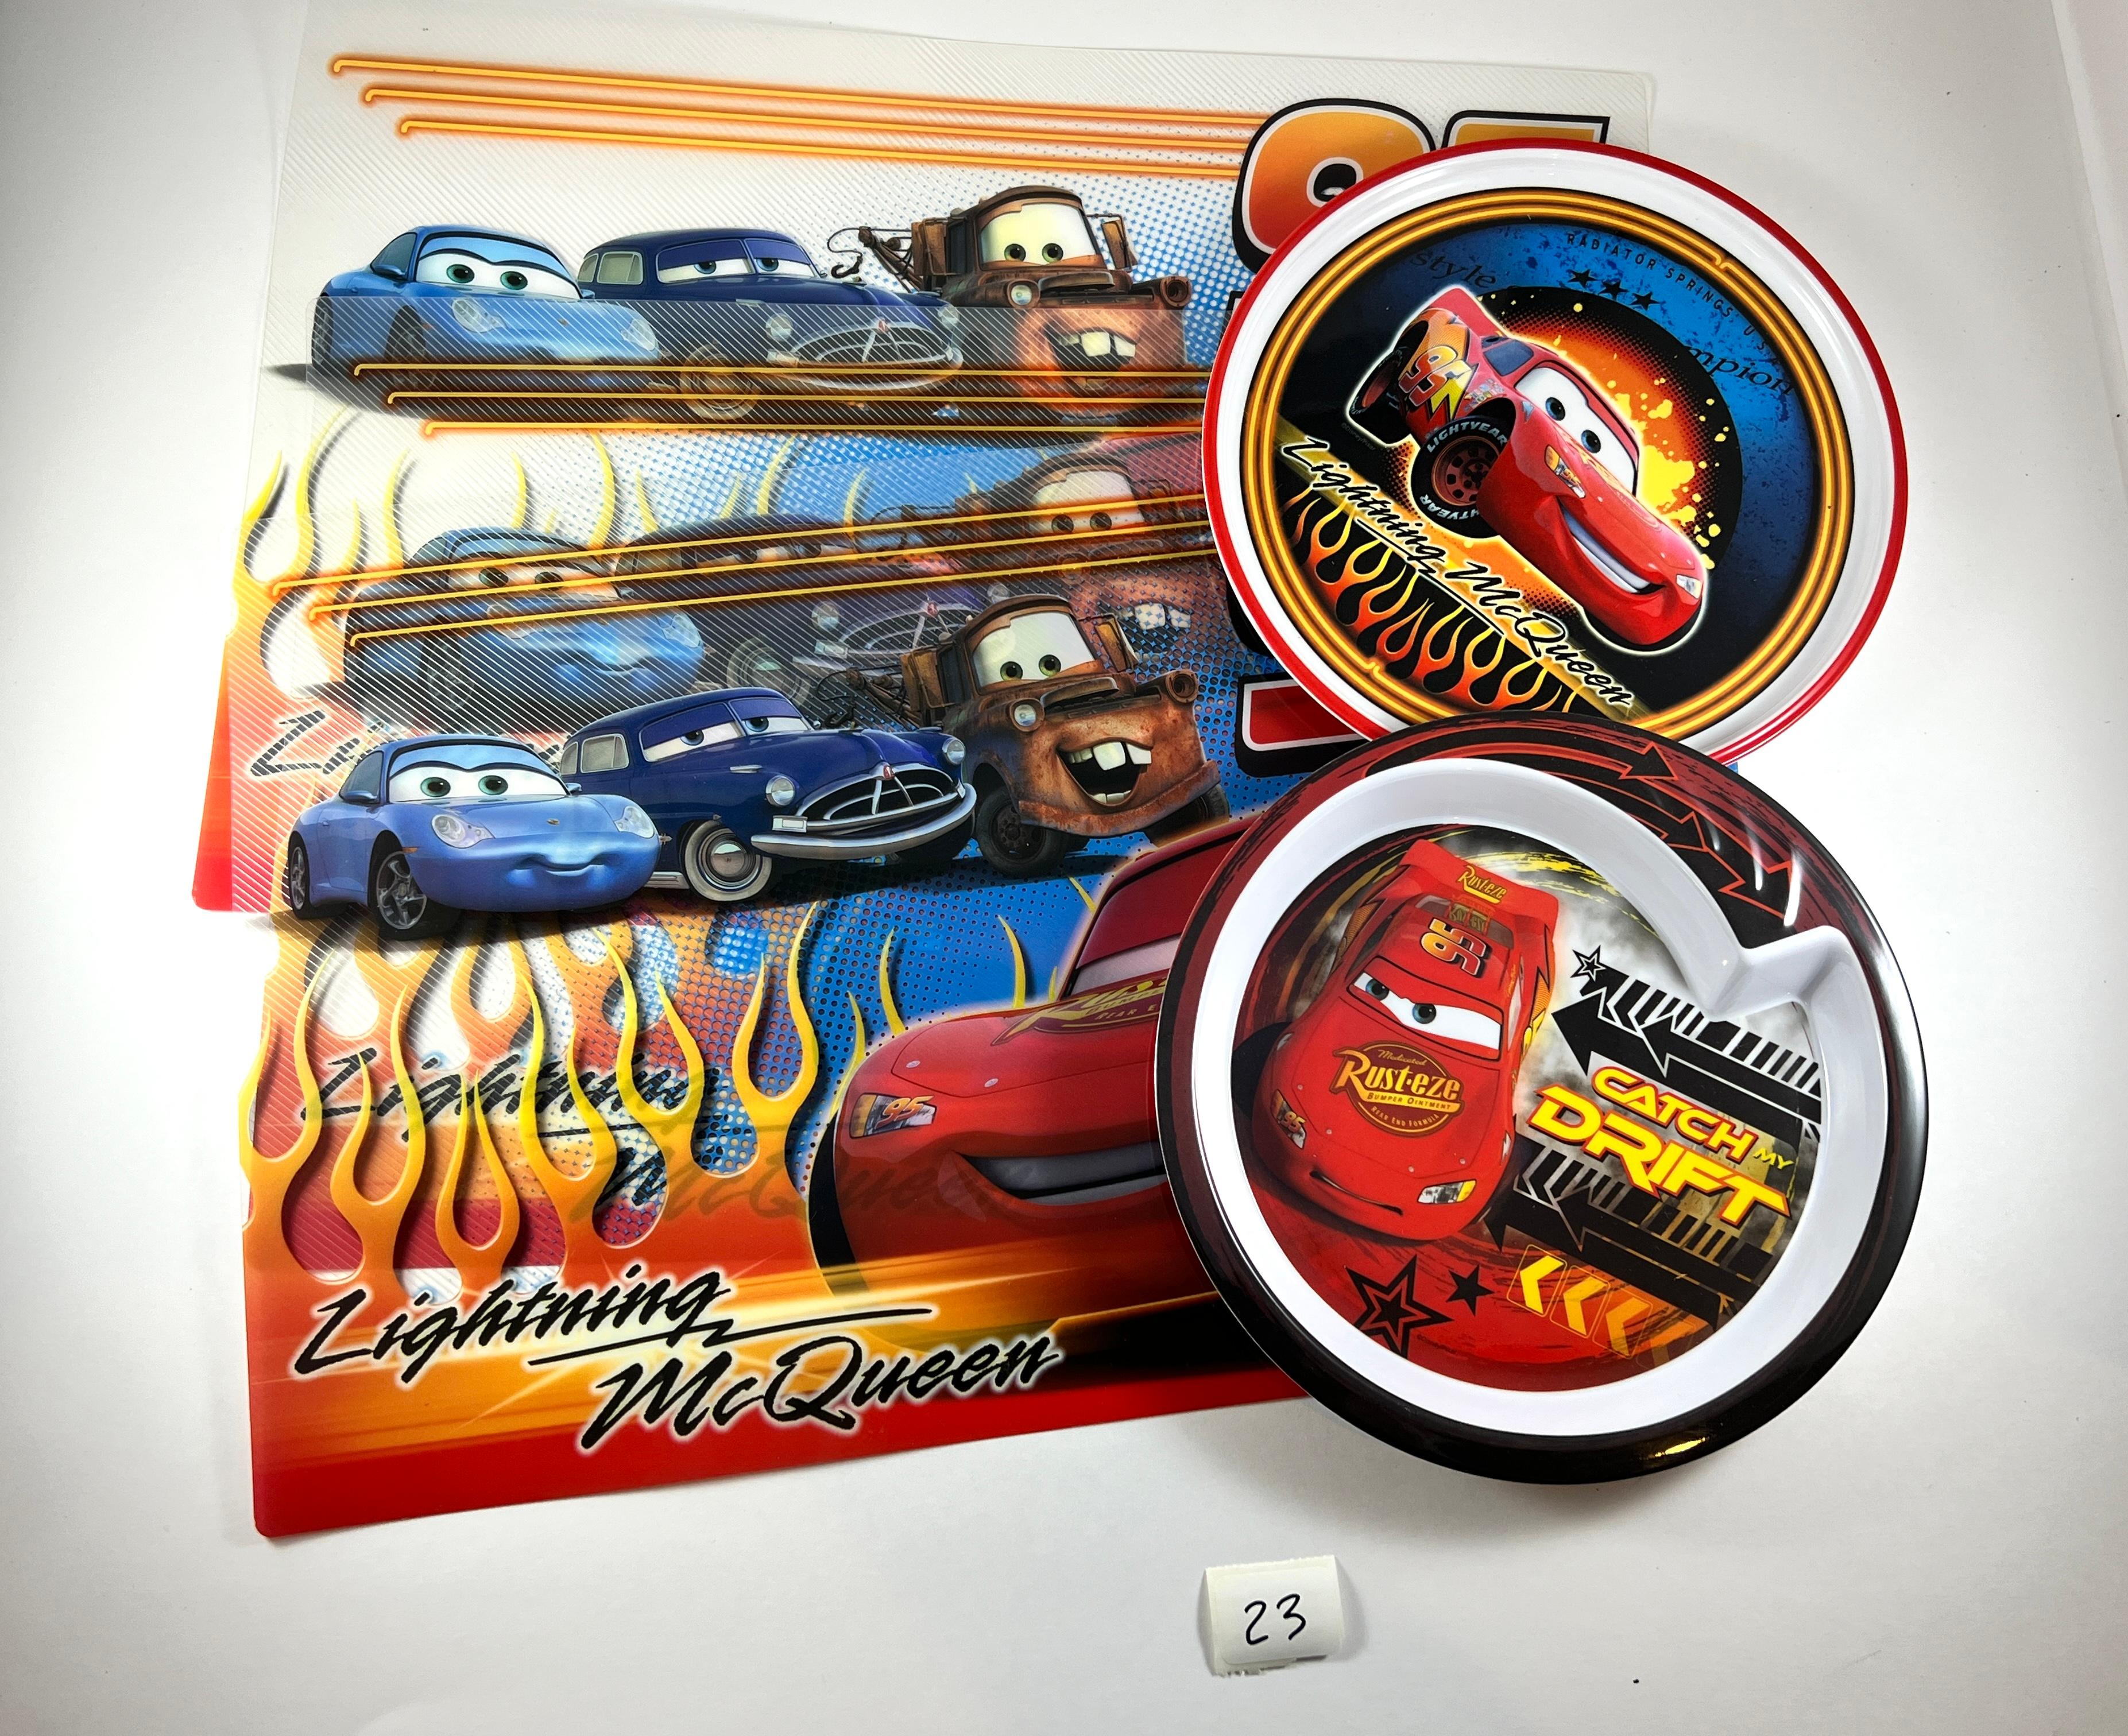 Cars lunch set